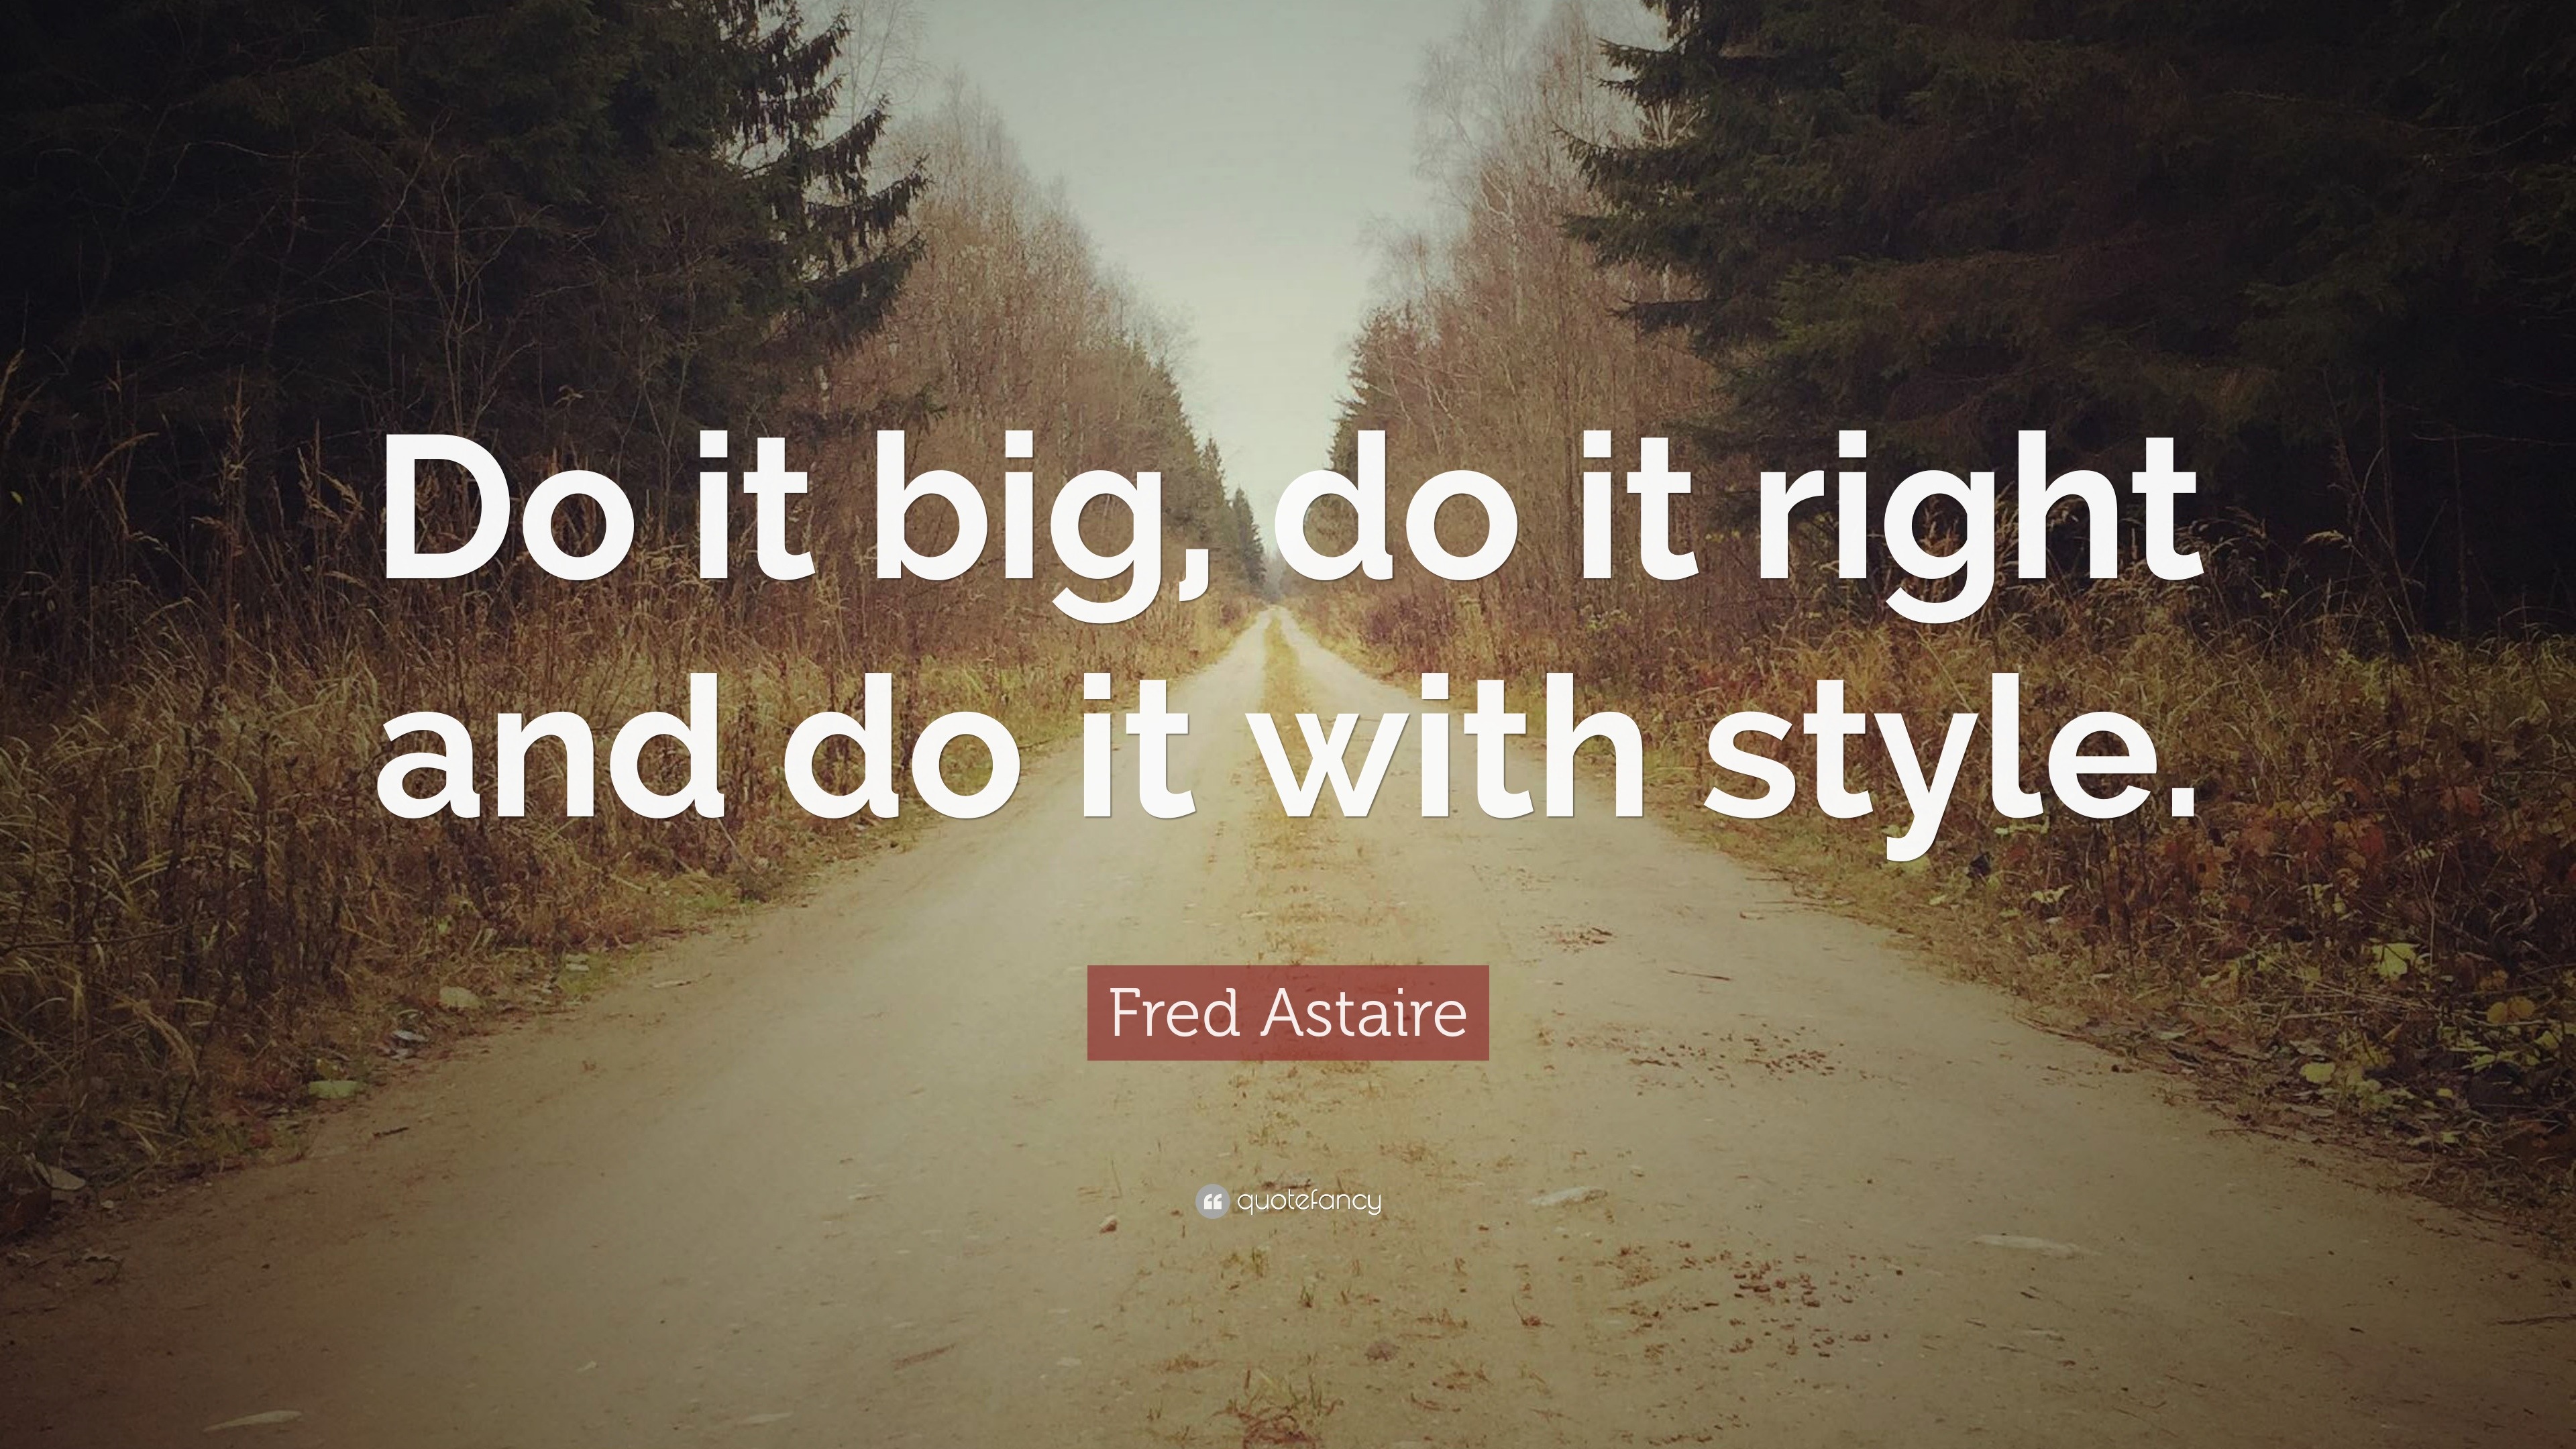 Fred Astaire Quote: “Do it big, do it right and do it with style.”